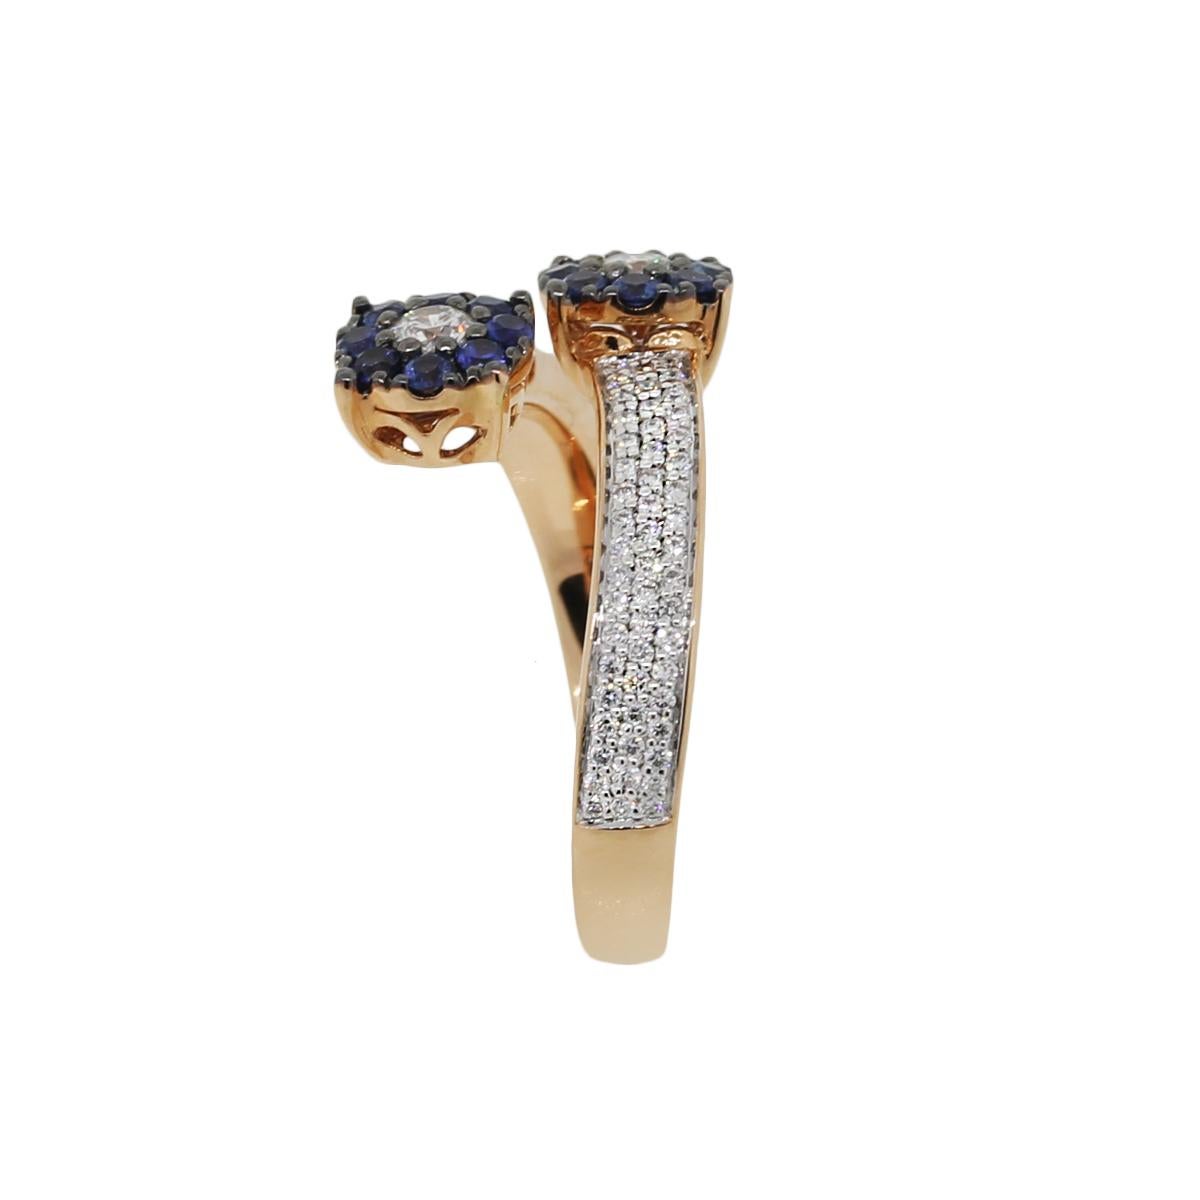 Material: 18k Rose gold
Diamond Details: Approximately 0.52ctw of round brilliant diamonds. Diamonds are I/J in color and VS2-SI1 in clarity
Sapphire Details: Approximately 0.43ctw of round Sapphires.
Ring Size: 7
Ring Measurements: 0.75″ x 0.50″ x